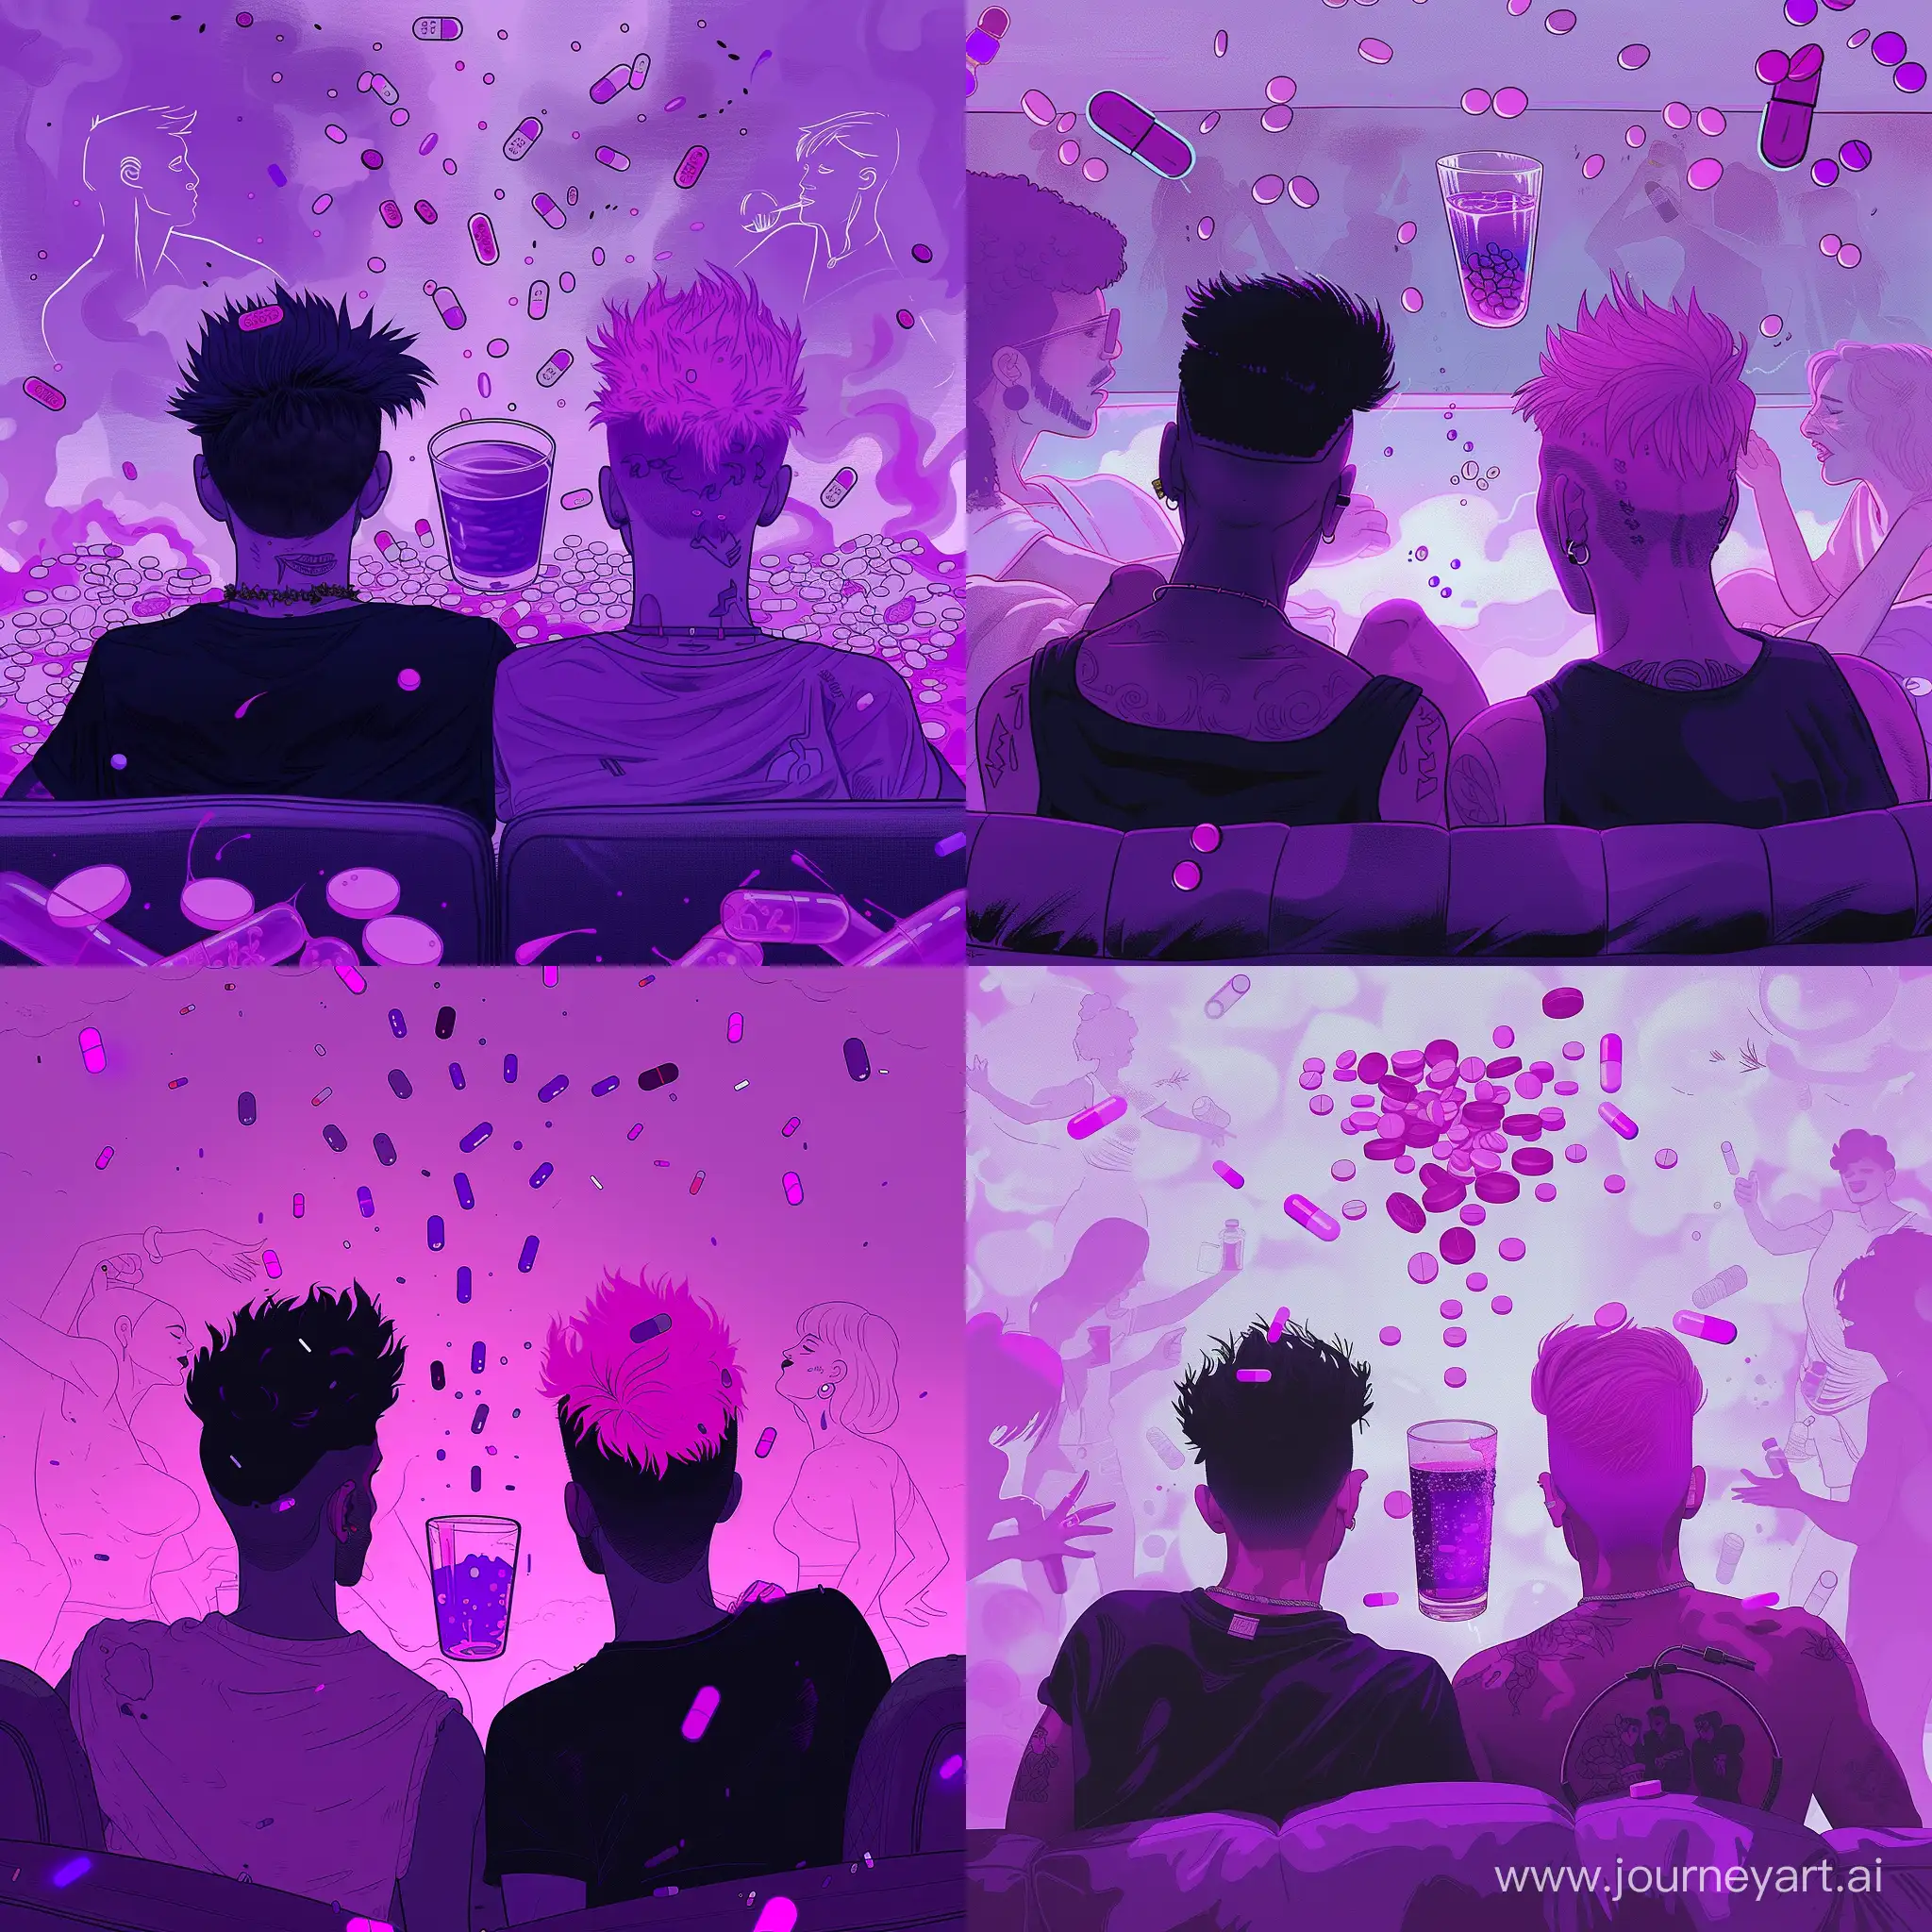 Vibrant-Purple-Party-Scene-with-Two-Figures-in-Silhouette